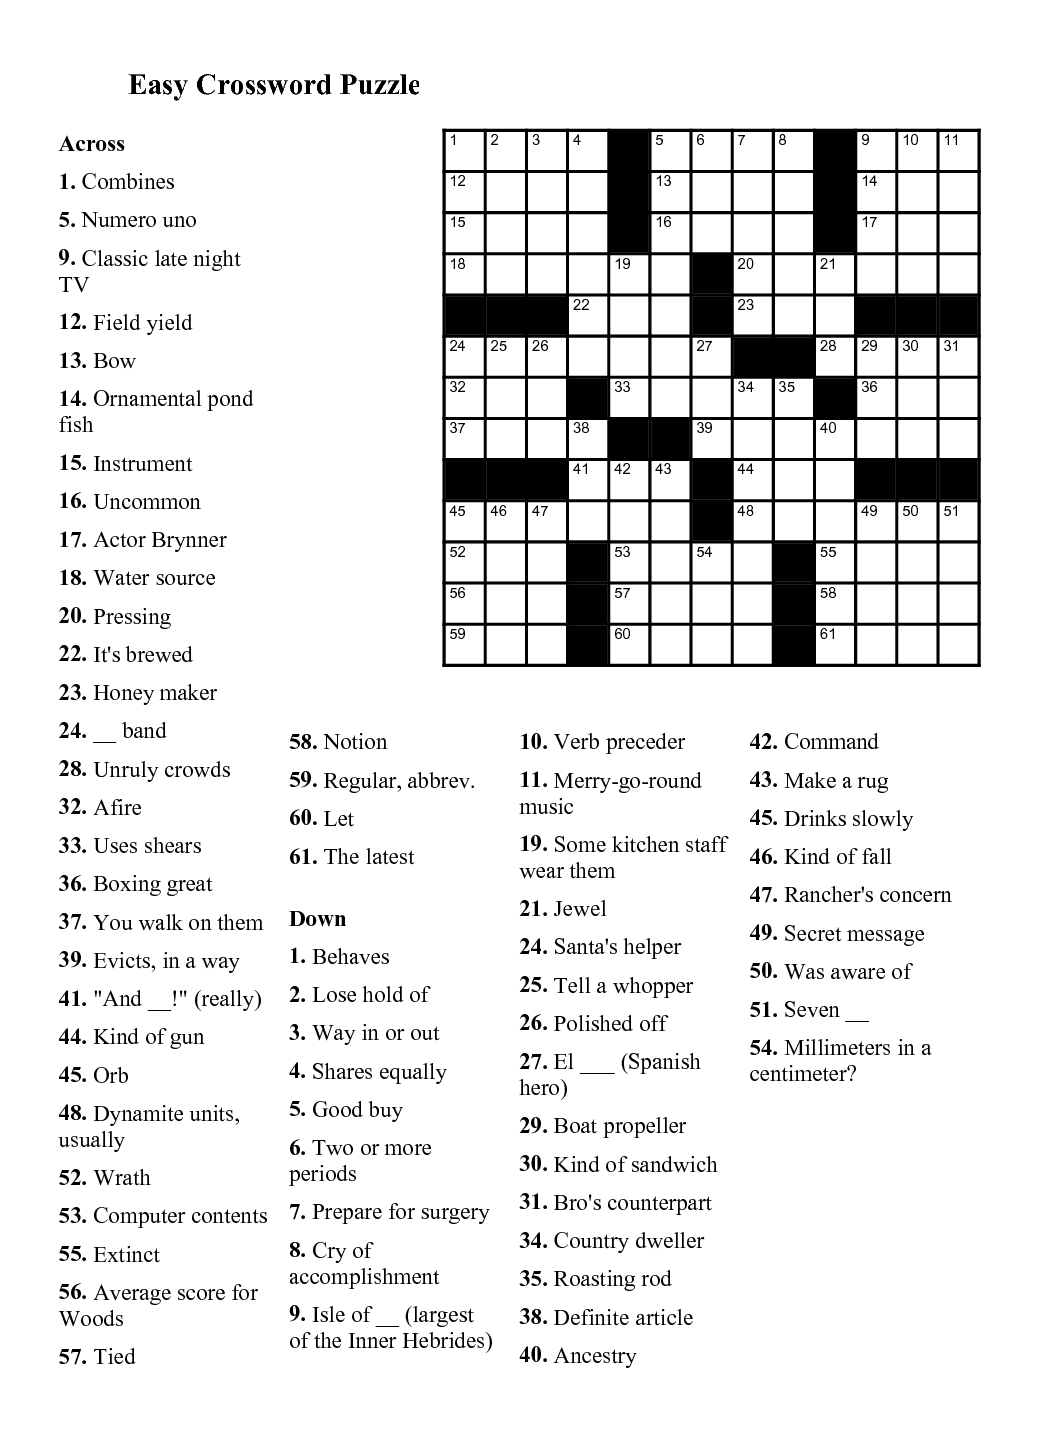 Easy Crossword Puzzles Printable Daily Template - Free Easy Crosswords